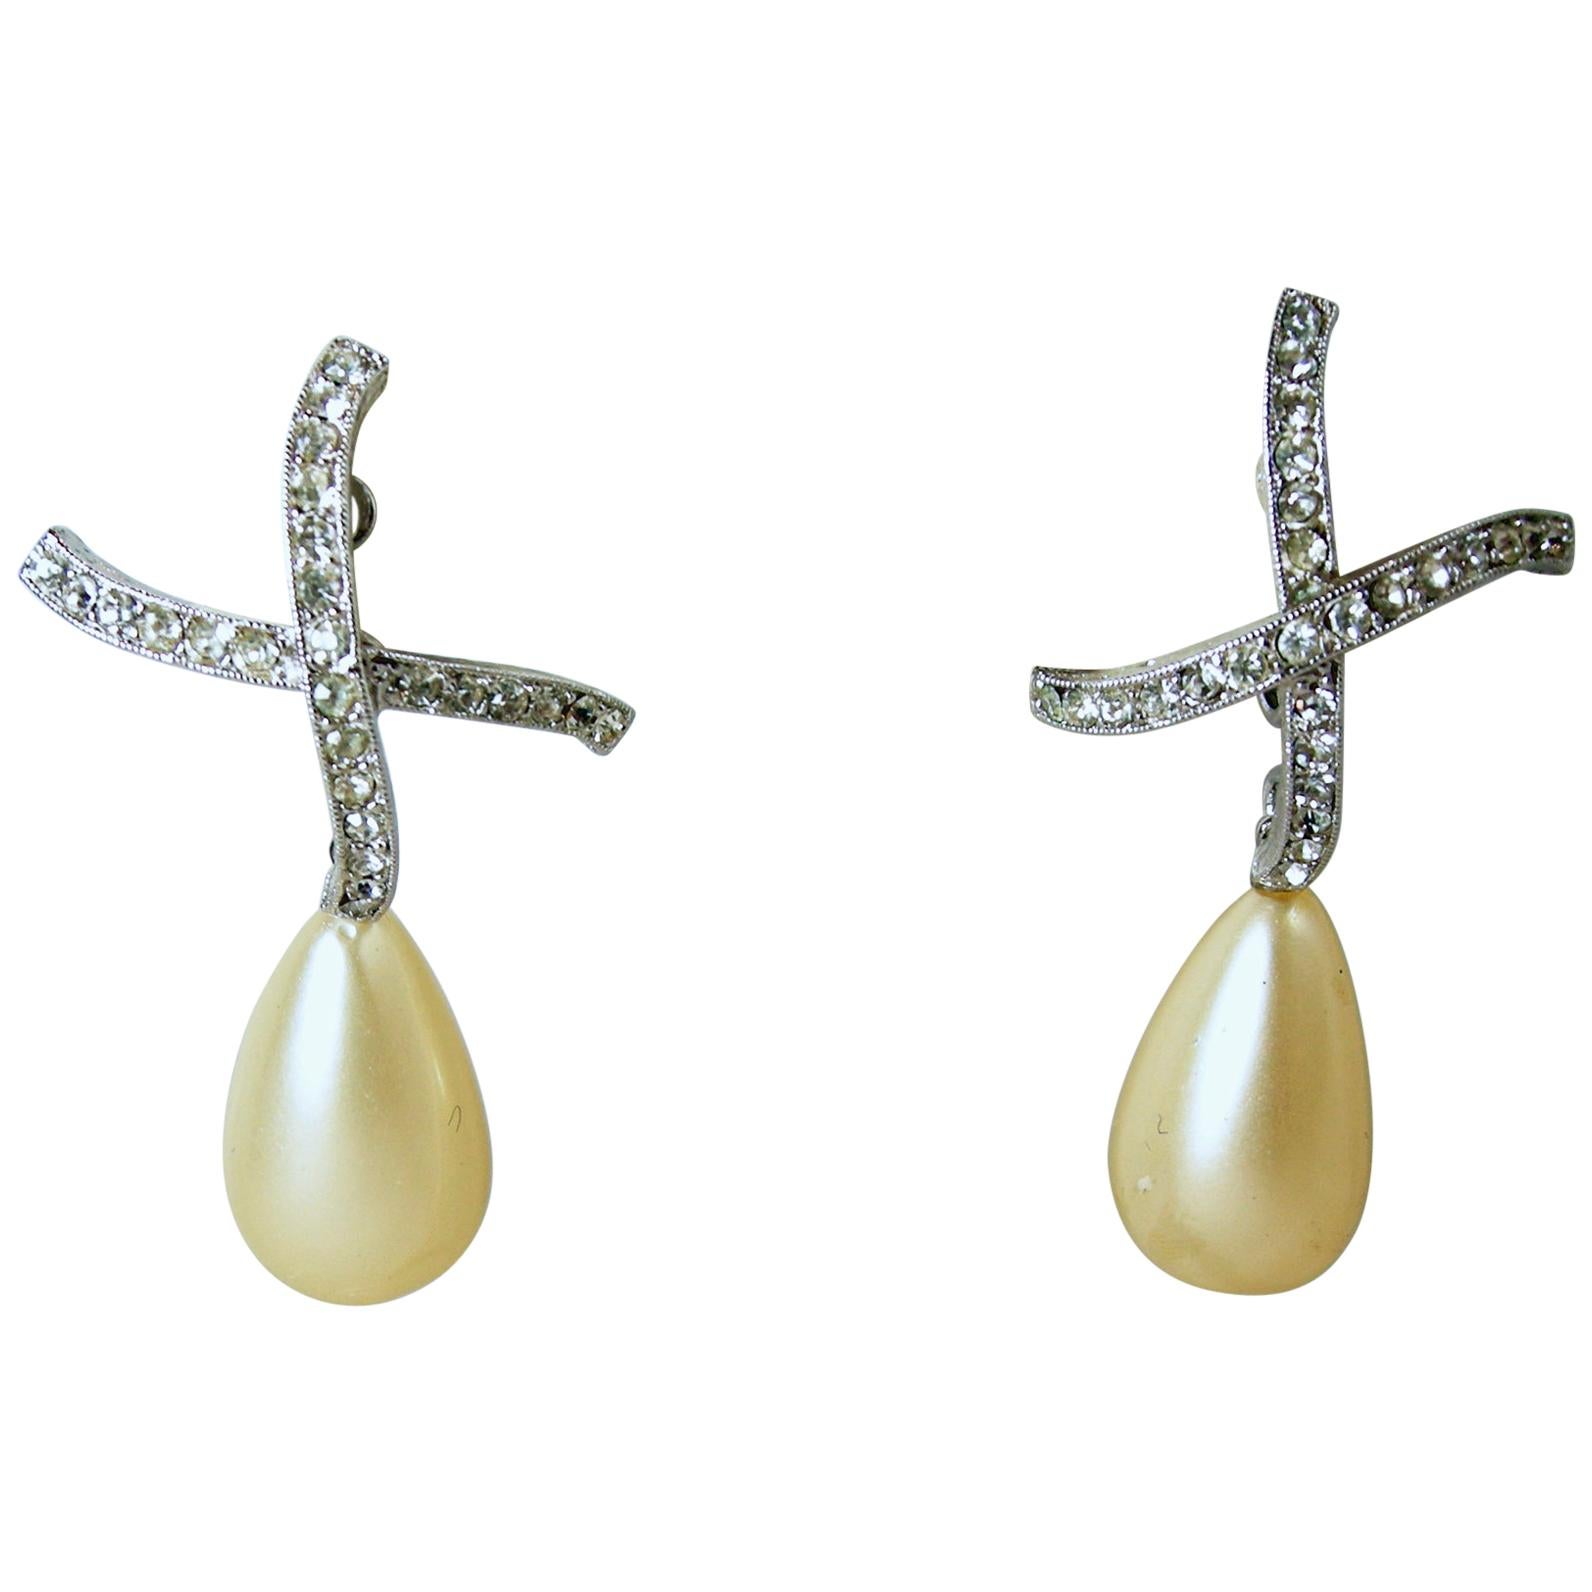 Vintage Rhinestone And Faux Pearl Drop Earrings For Sale